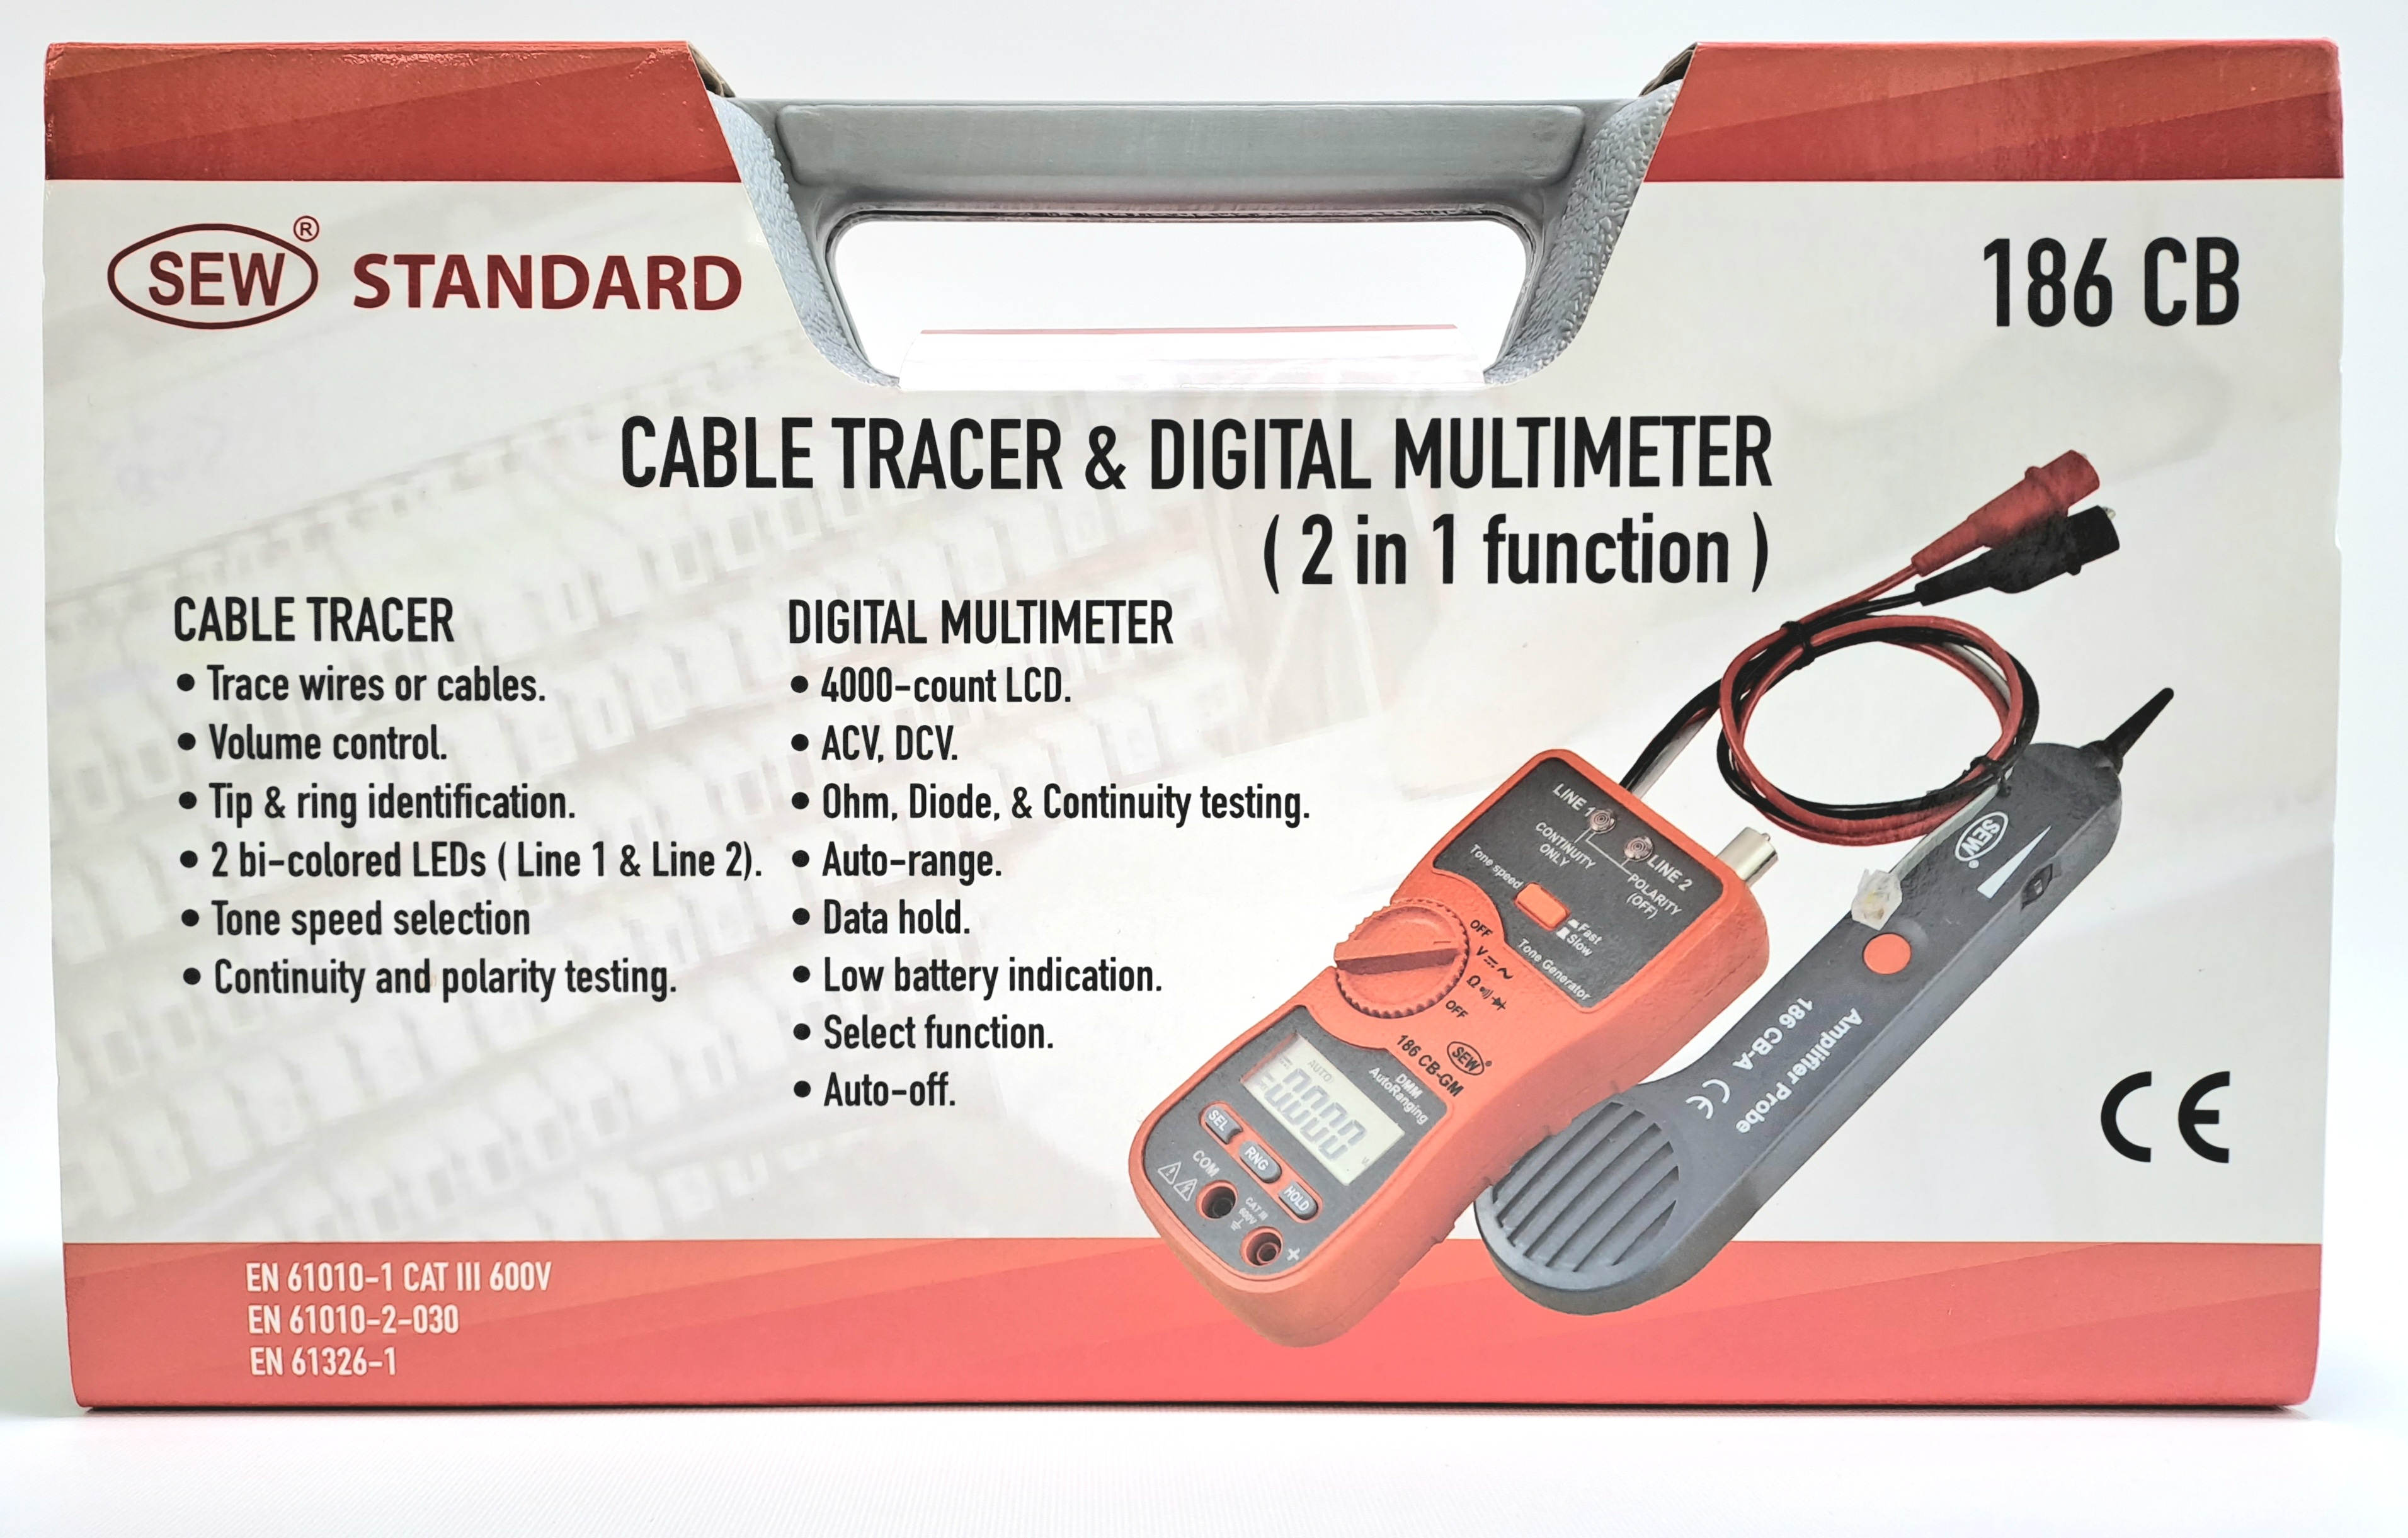 2 in 1 Cable Tracer & Digital Multimeter 